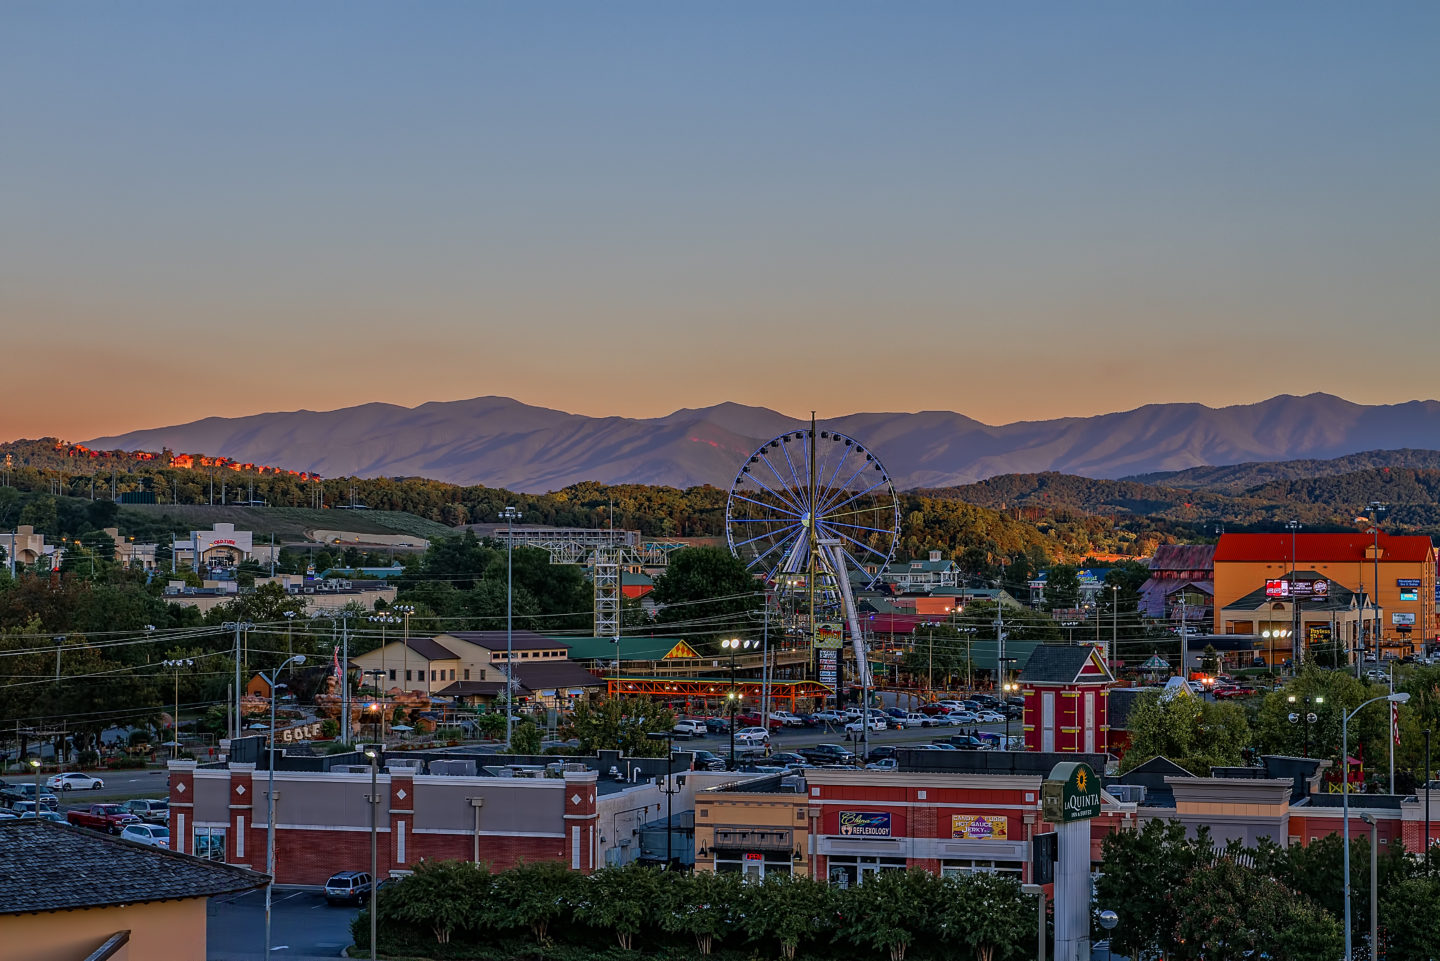 17 Best images about Attractions | Gatlinburg, Pigeon Forge & Sevierville on Pinterest 